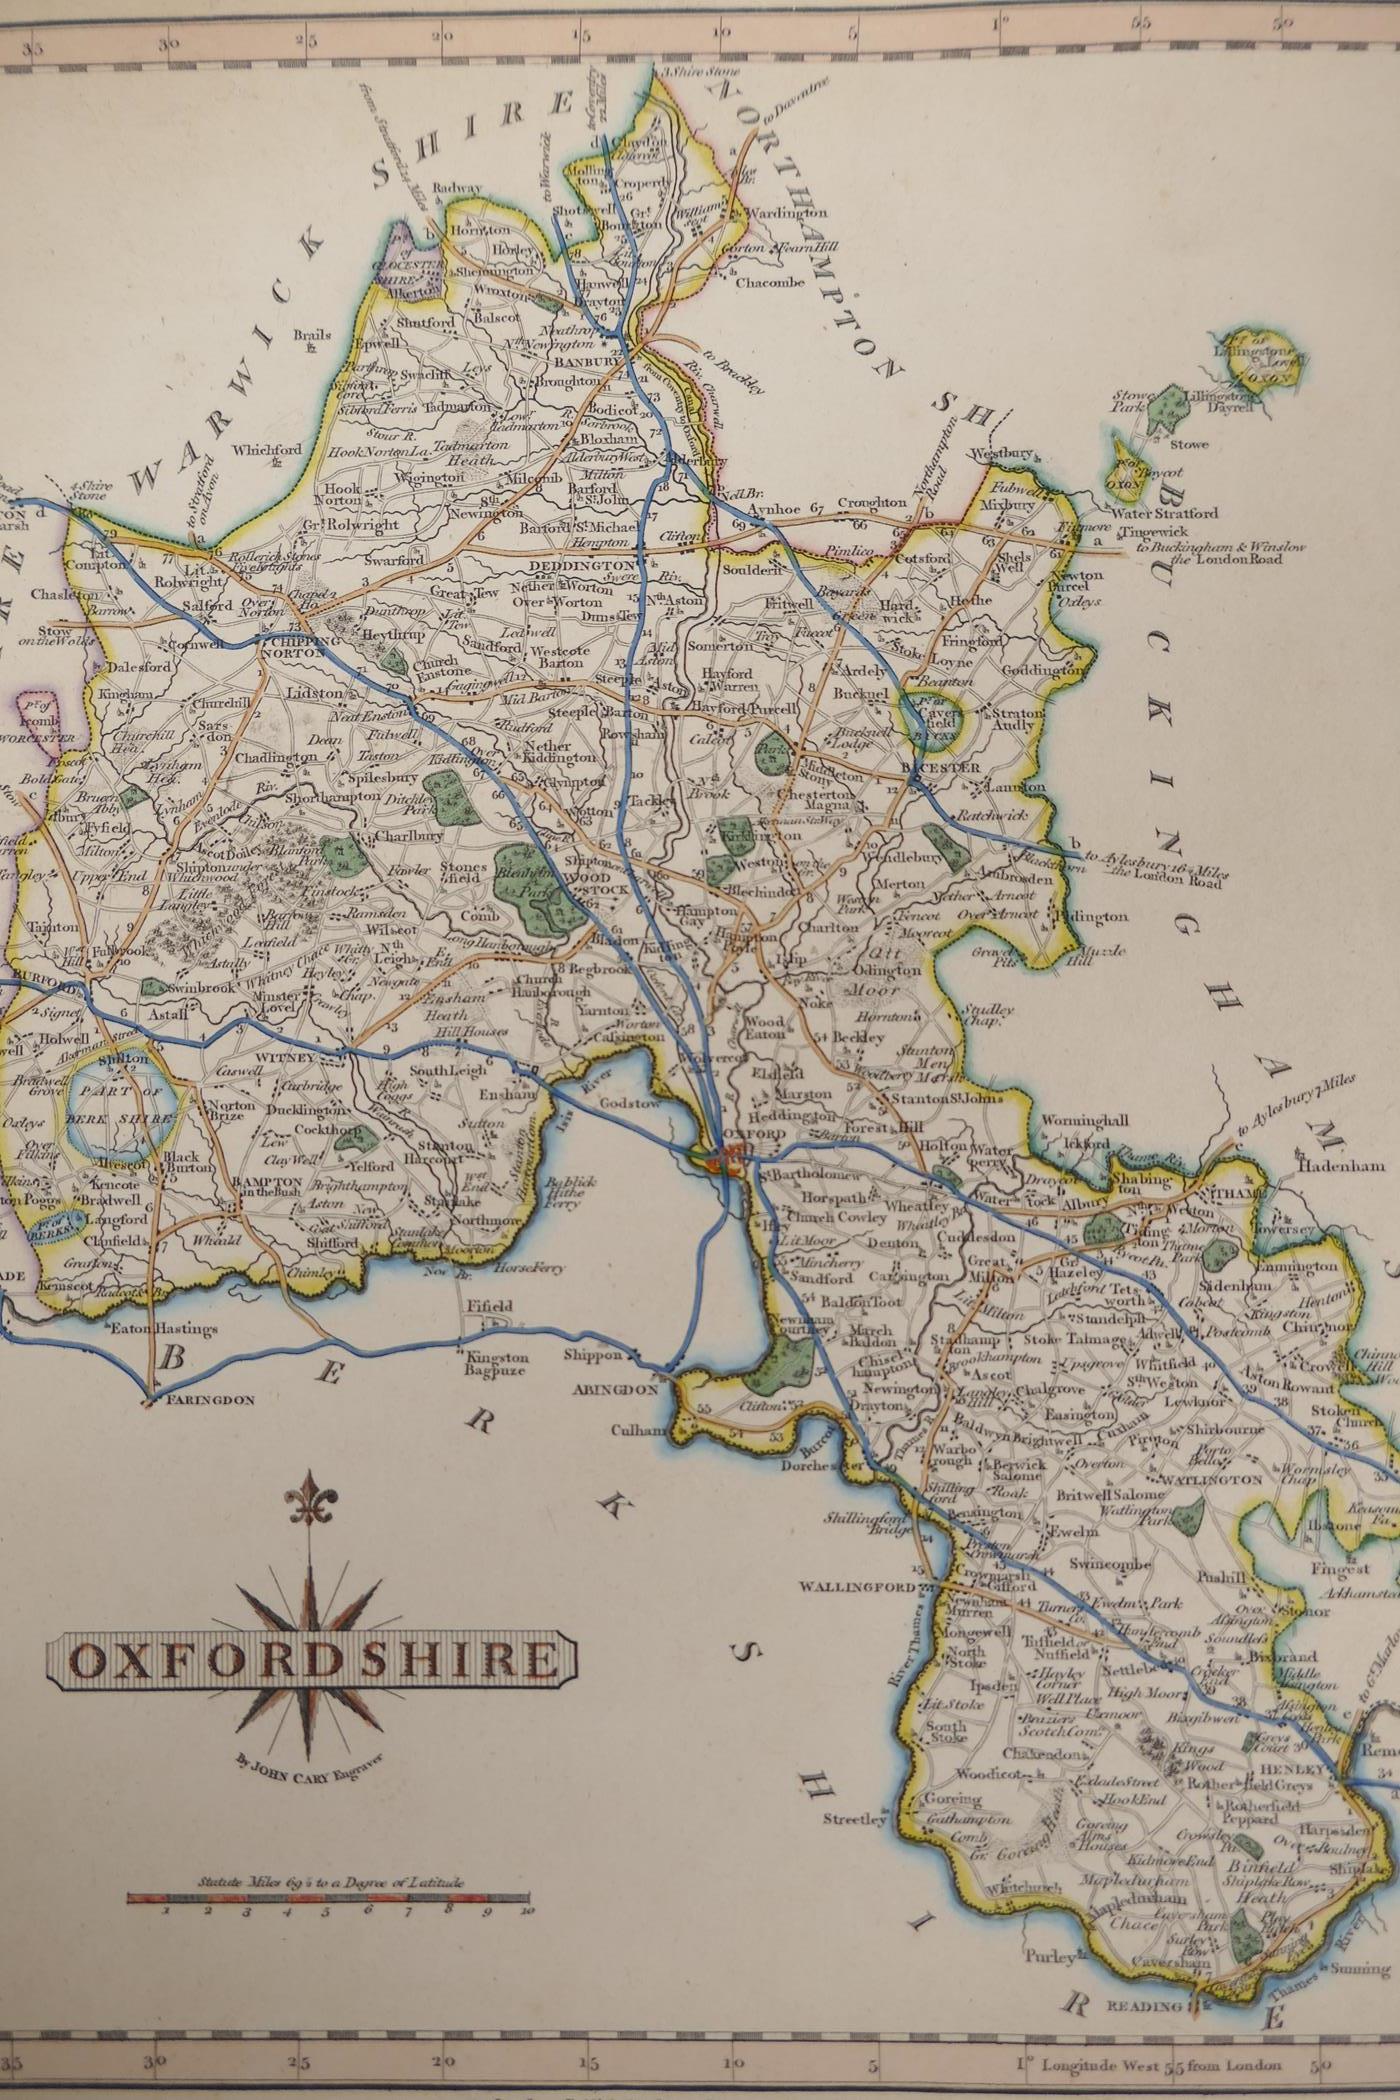 A map of Oxfordshire after John Cary, 9" x 11", together with a written description of the county